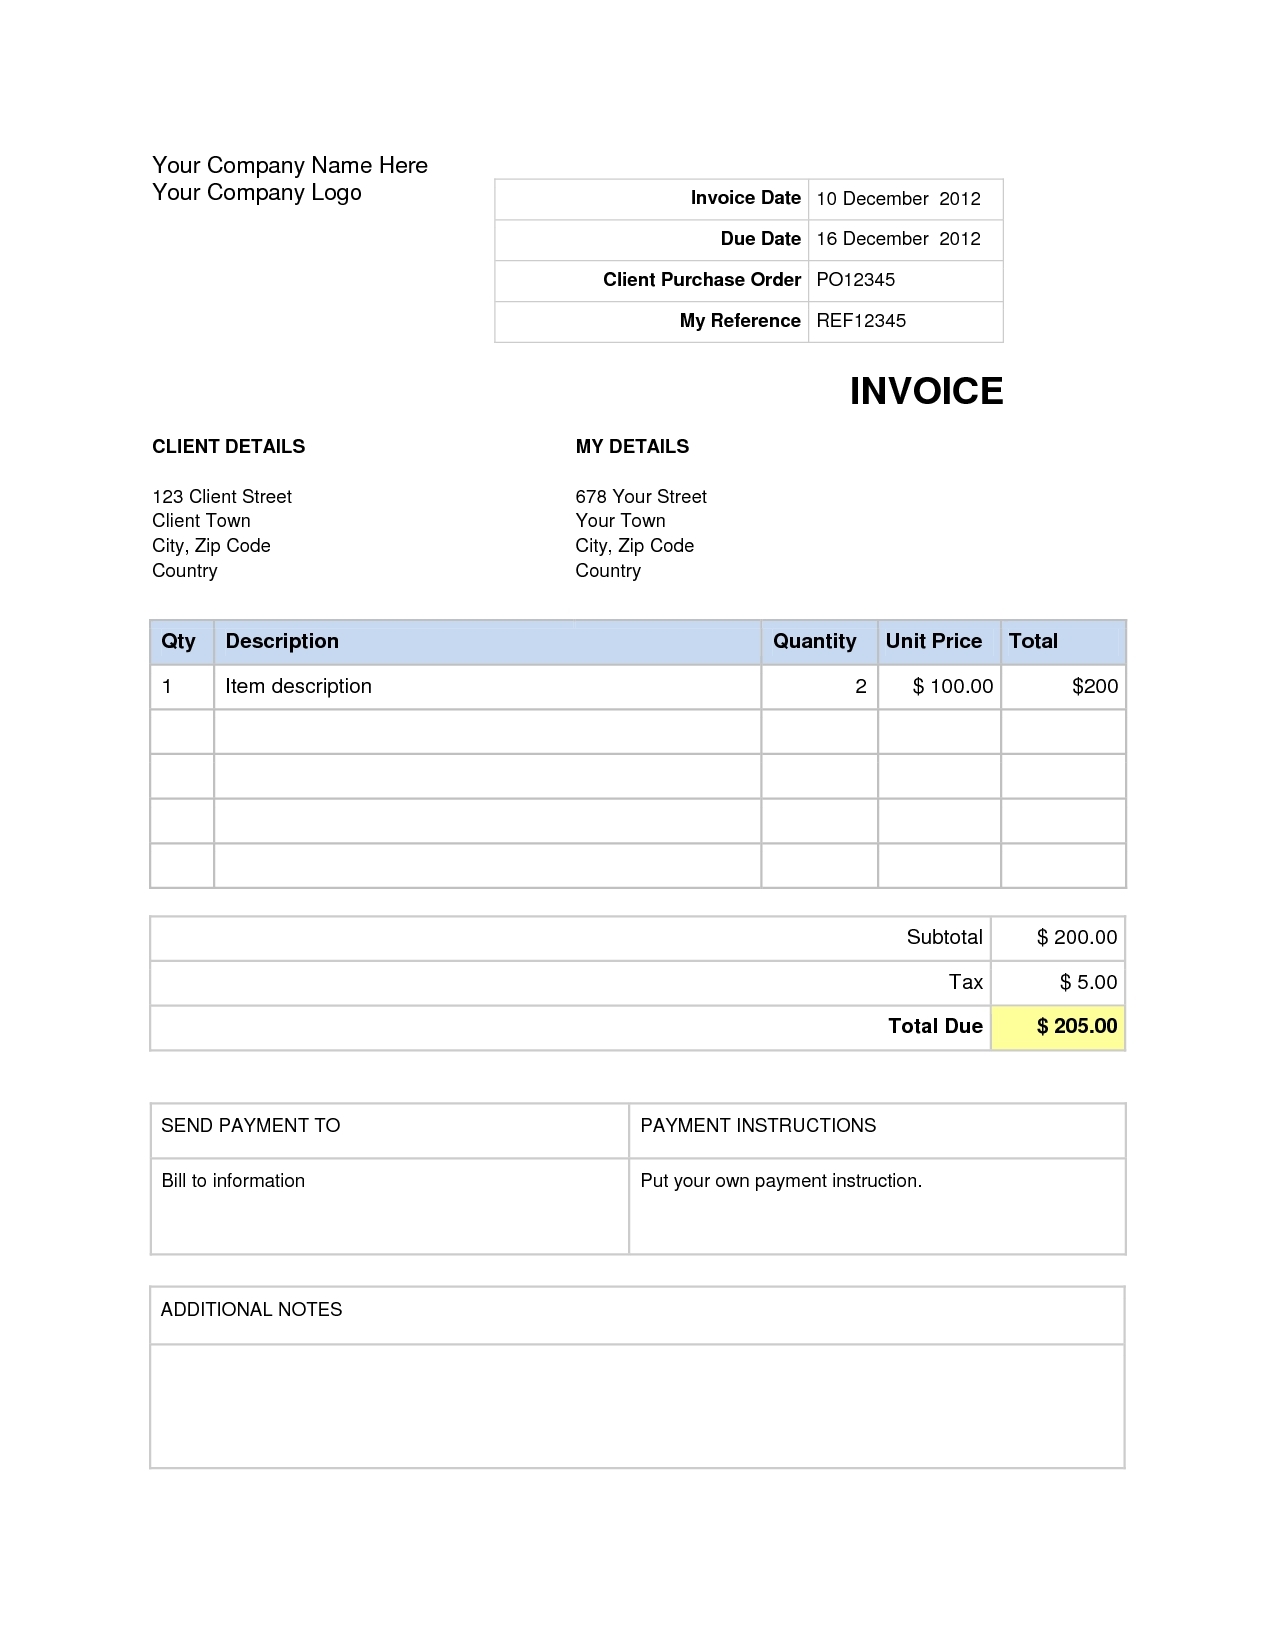 invoice template word 2007 free download doc600690 invoice template word 2007 free download bizdoska 1275 X 1650